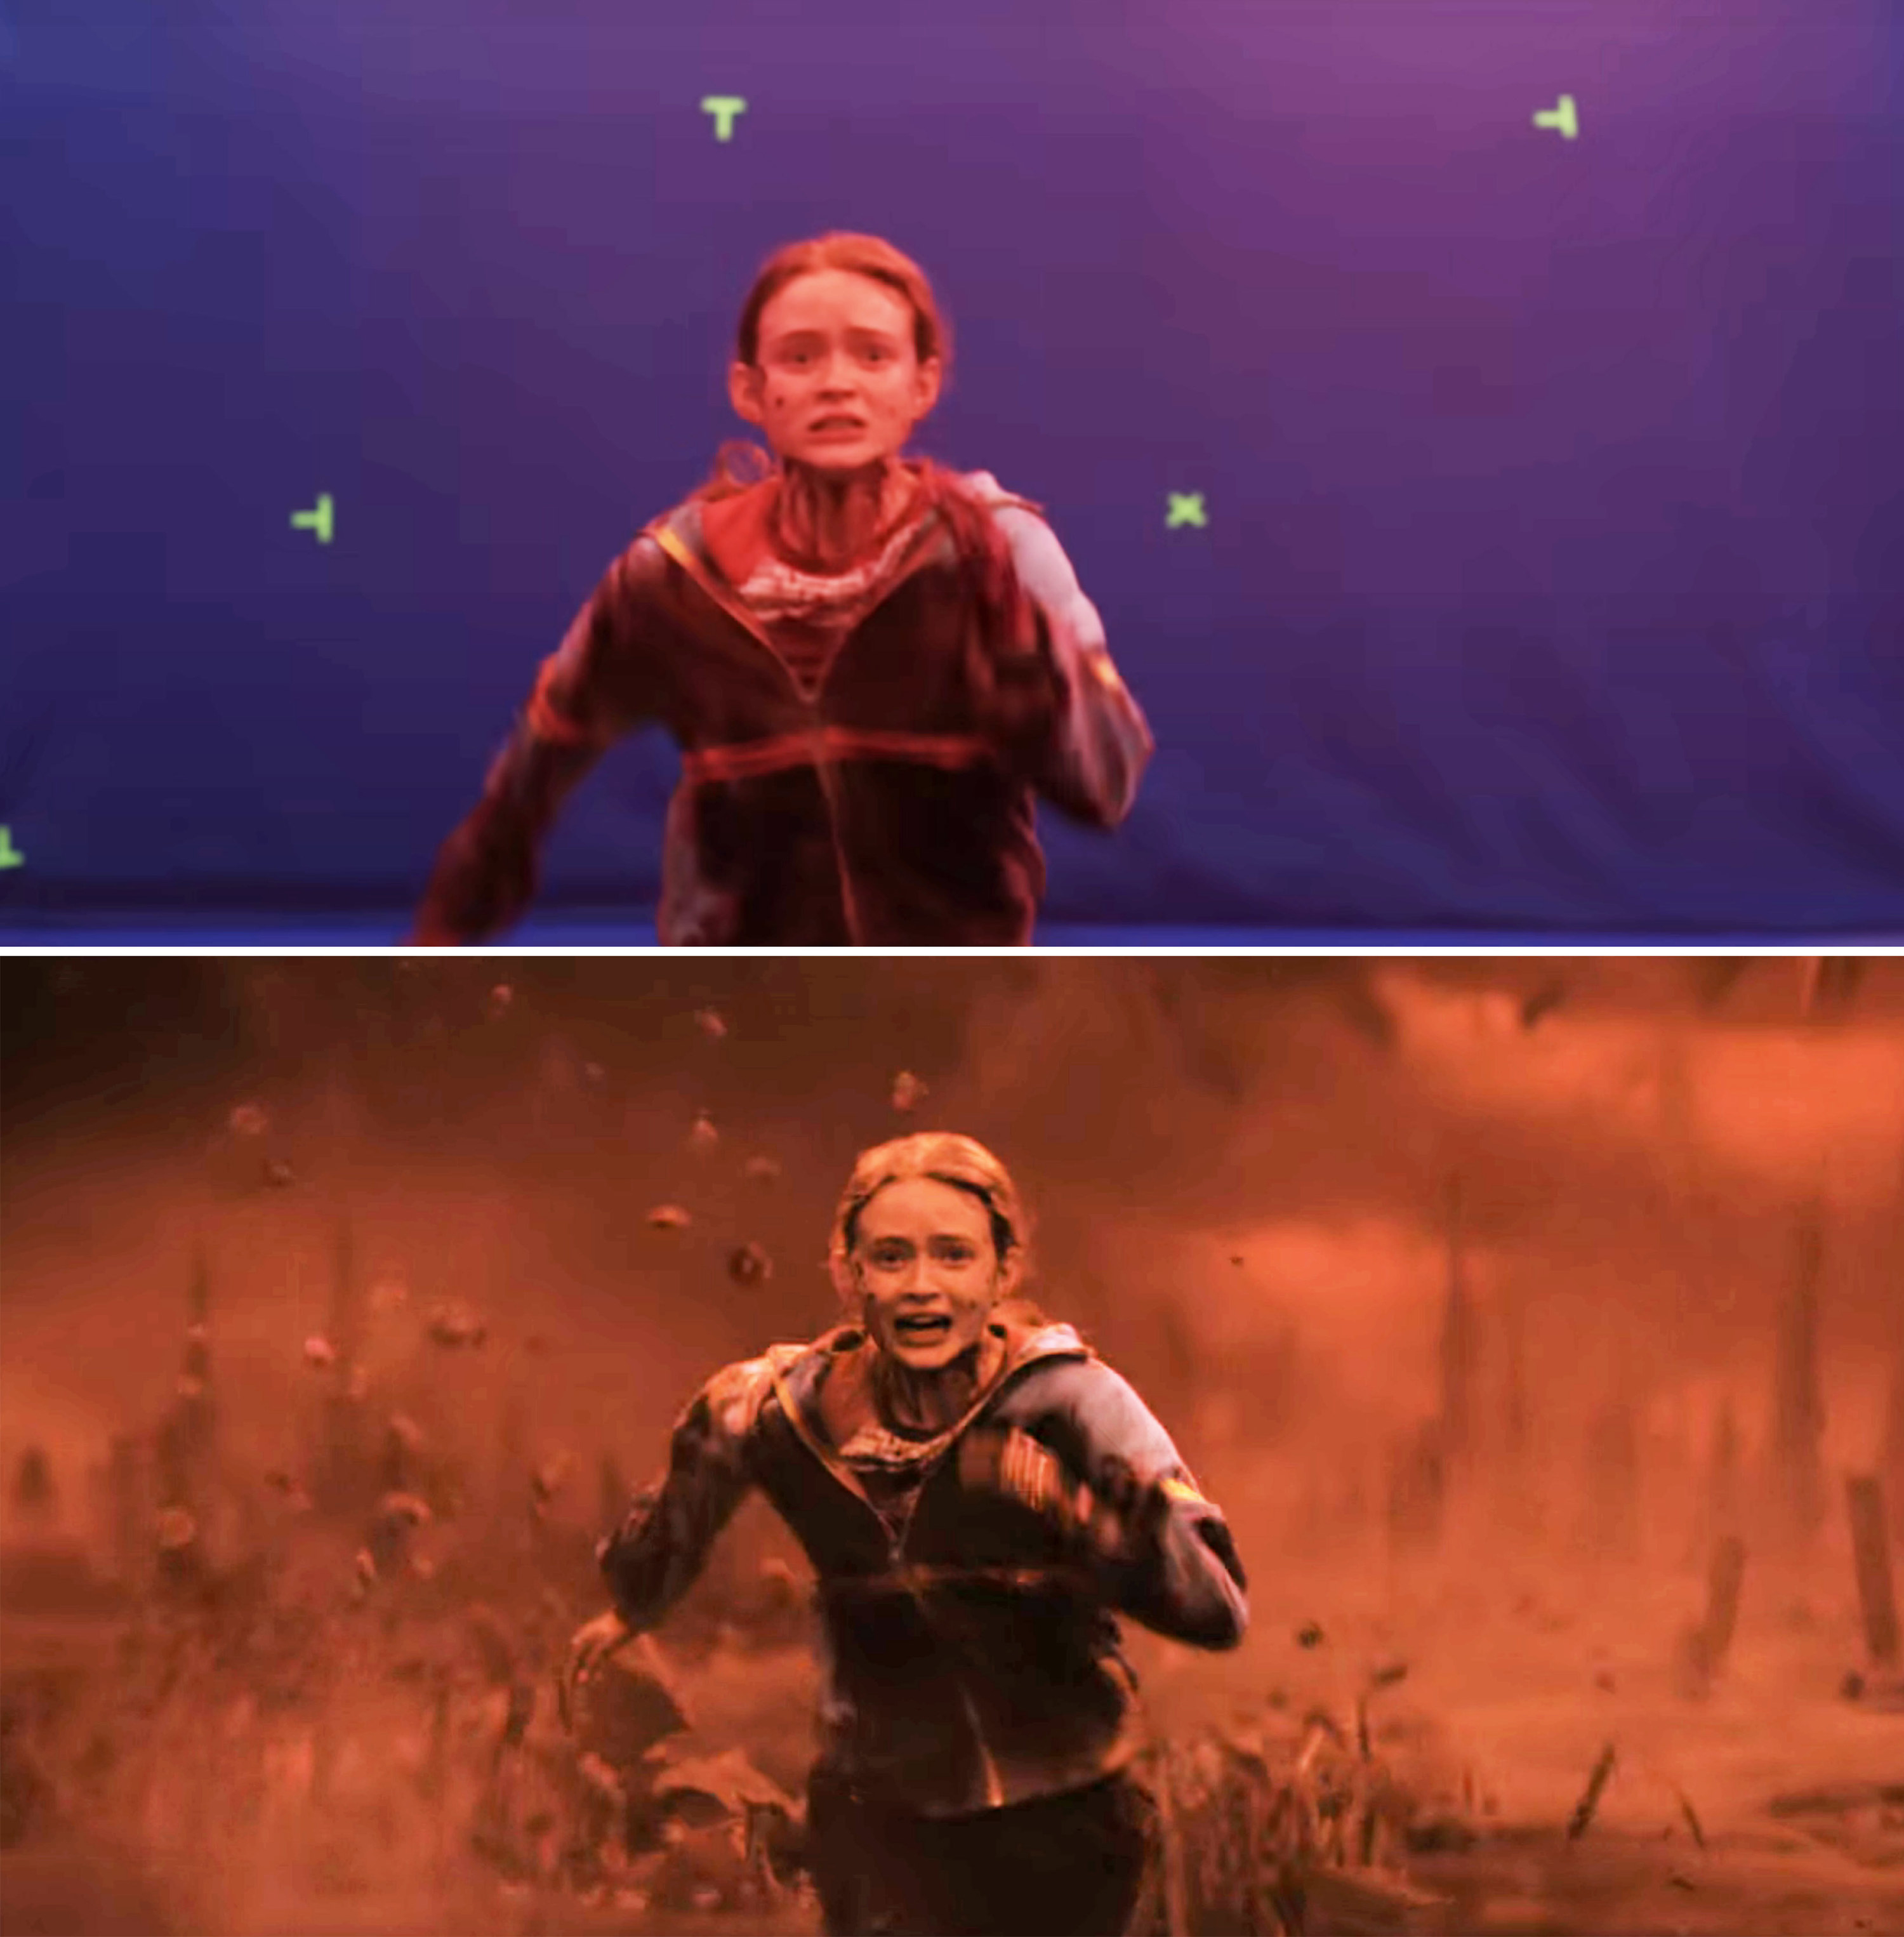 Sadie running on a blue screen soundstage vs Max running in the Upside Down